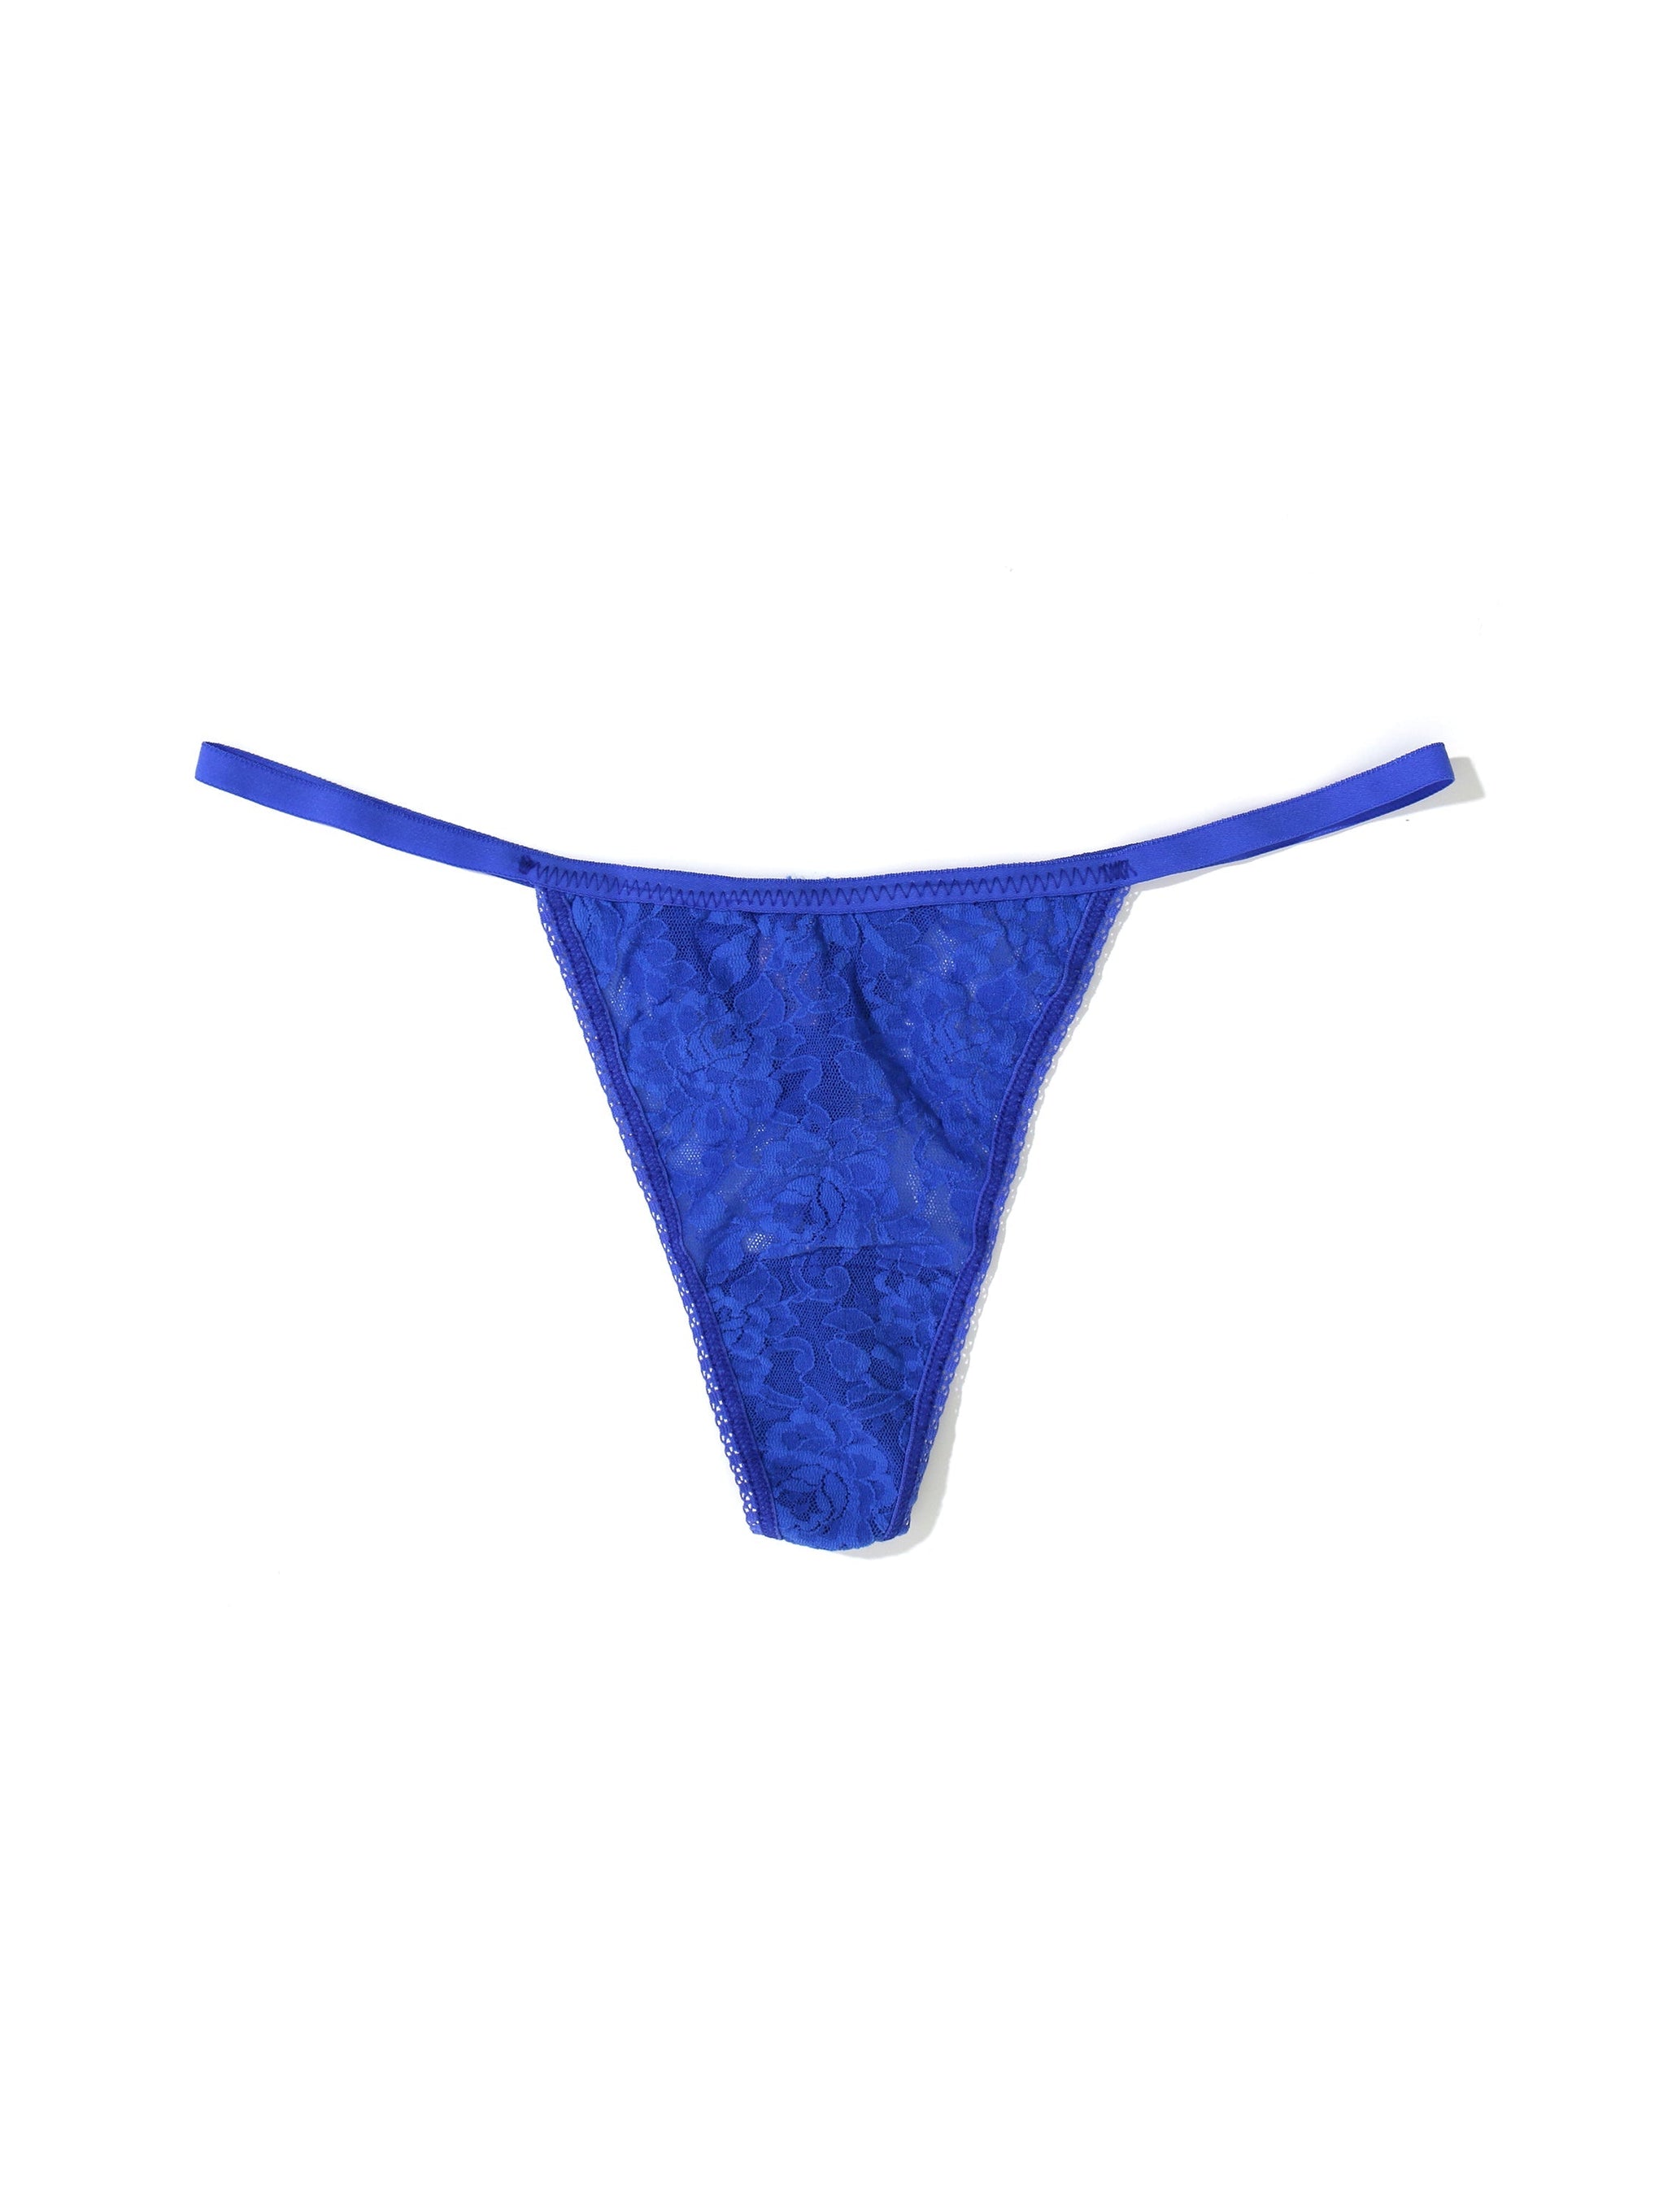 Hanky Panky High Rise G-string in Blue Solace